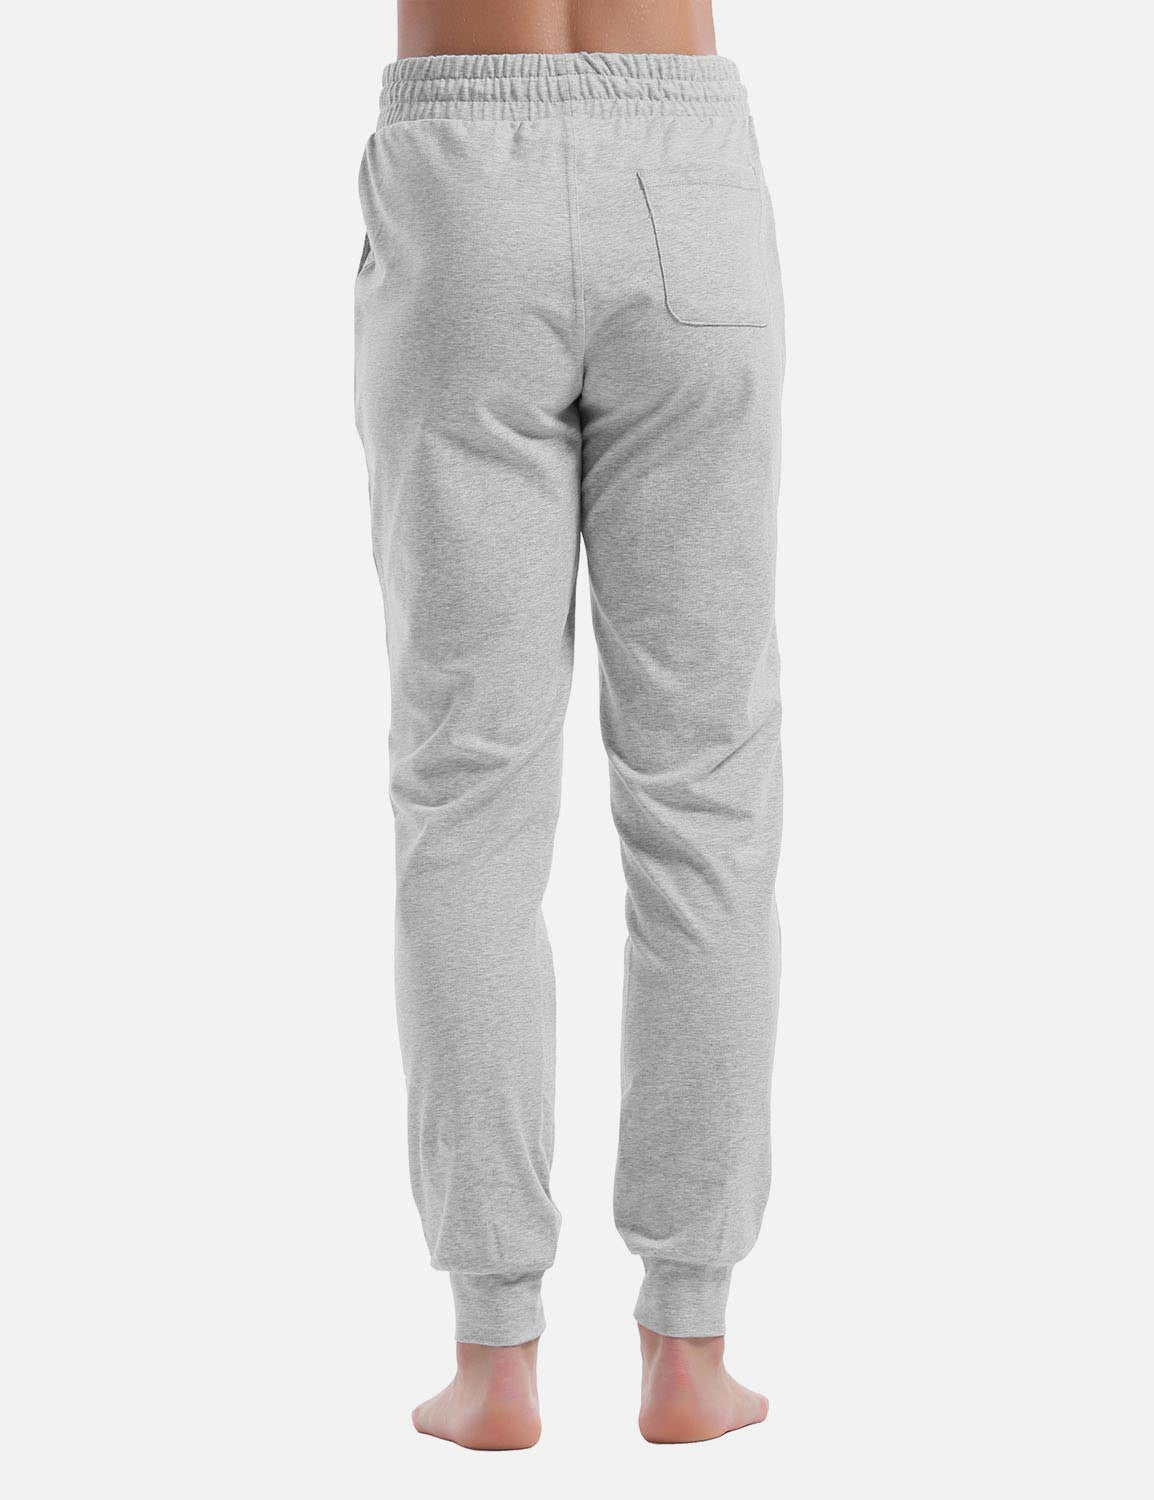 Baleaf Women's Cotton Comfy Pocketed & Tapered Weekend Joggers abh103 Light Gray Back